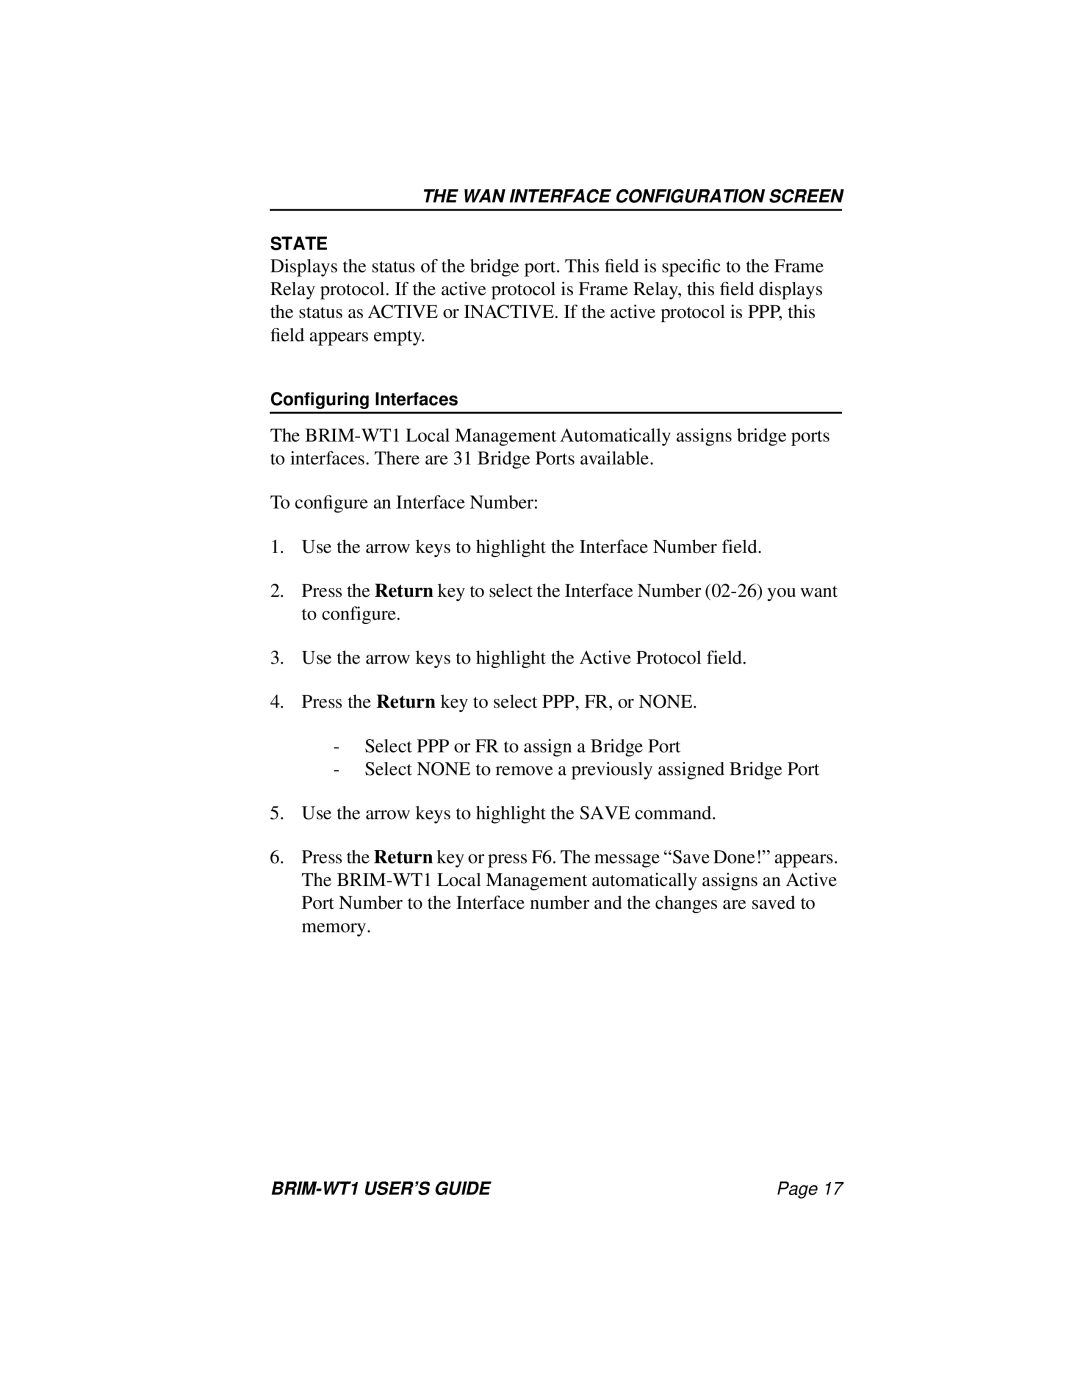 Cabletron Systems BRIM-WT1 manual To conﬁgure an Interface Number 